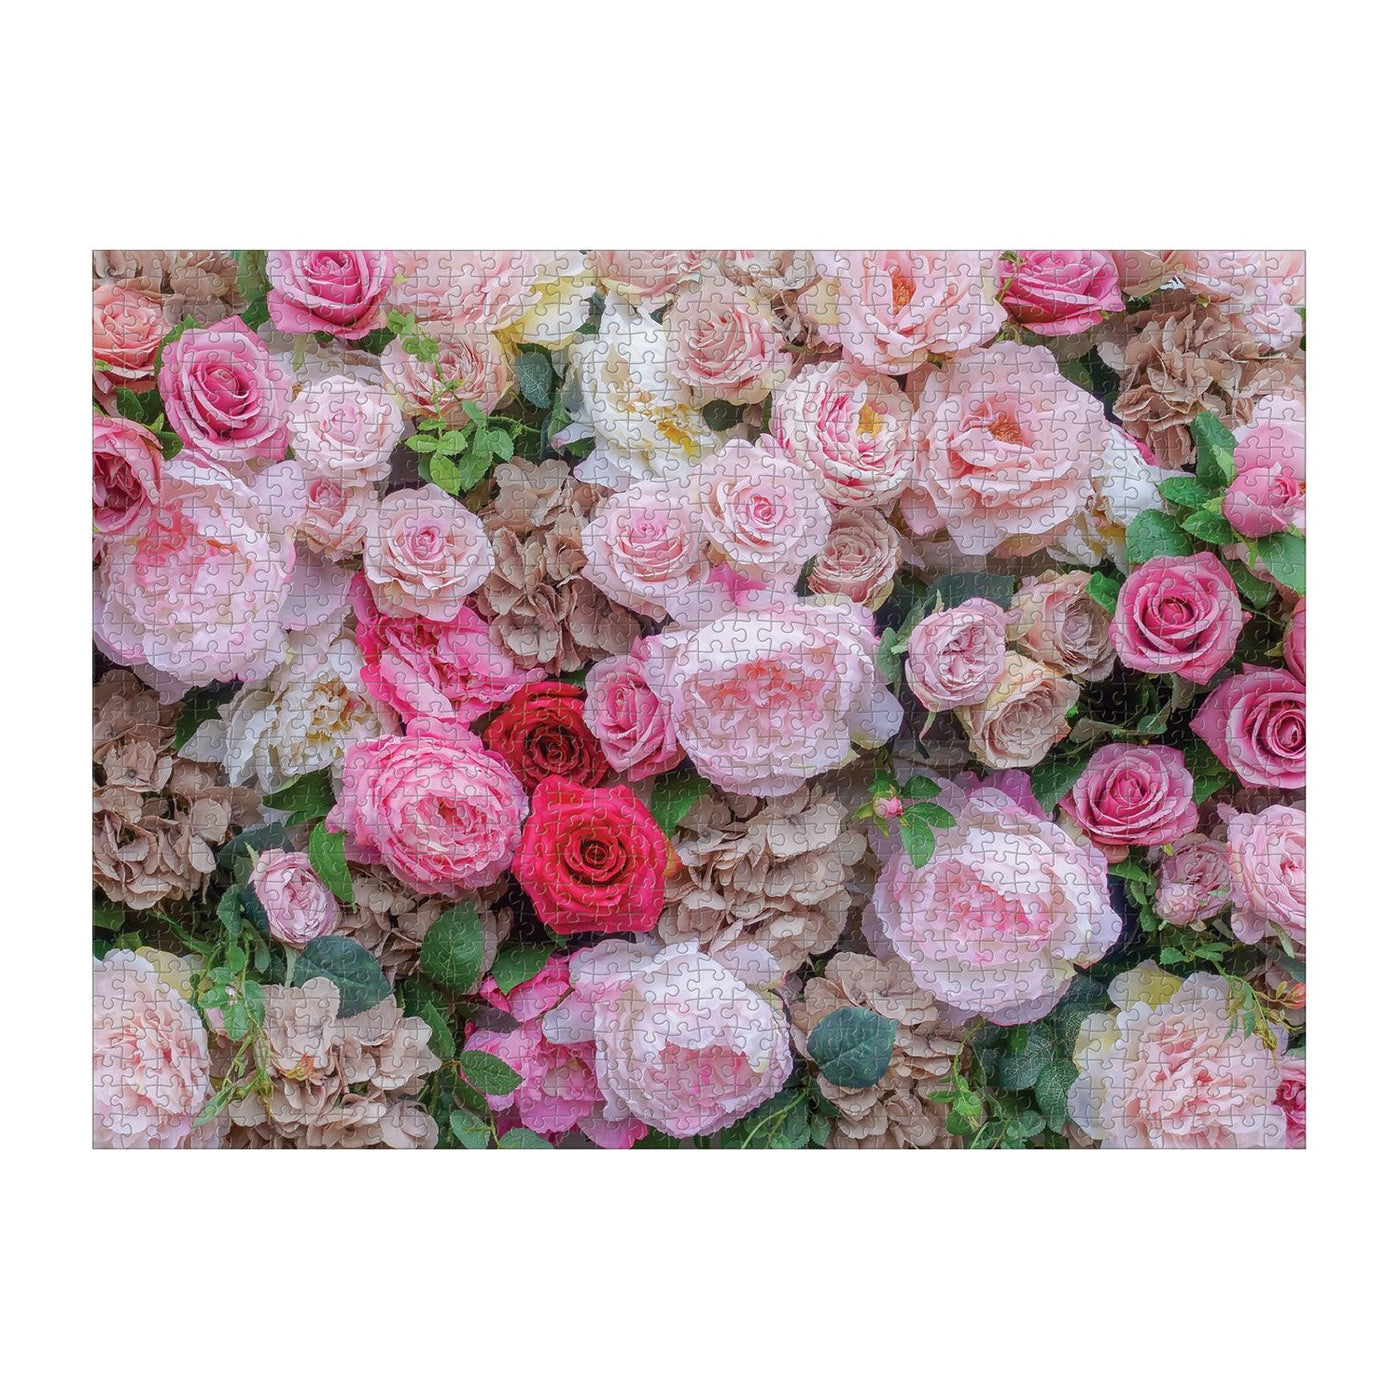 English Roses | 1,000 Piece Jigsaw Puzzle